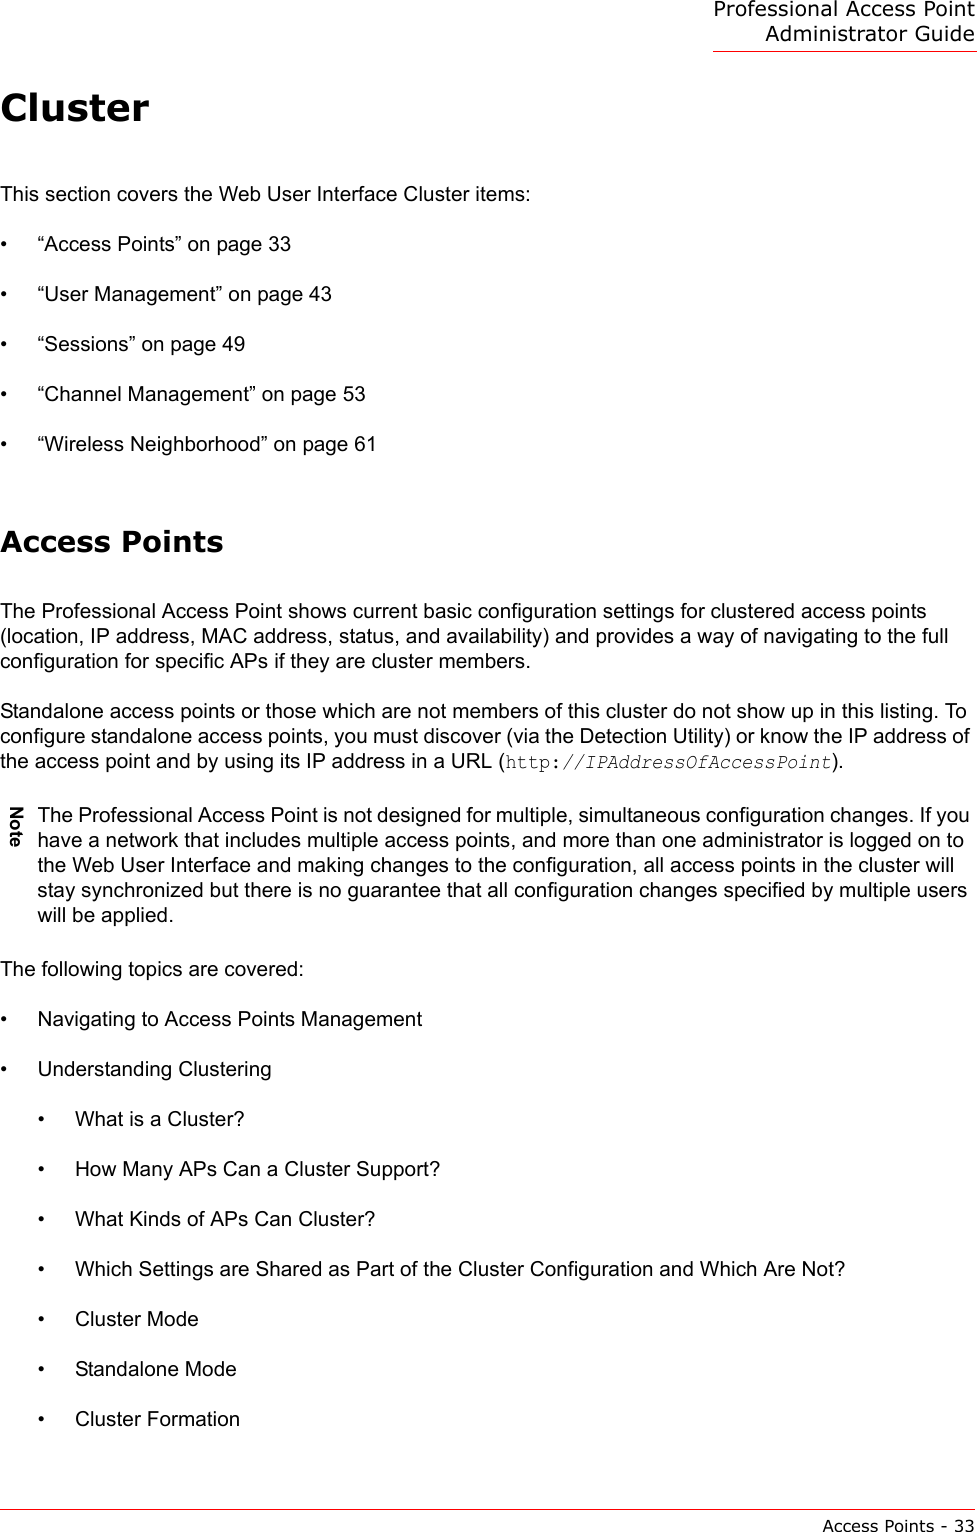 Professional Access Point Administrator GuideAccess Points - 33ClusterThis section covers the Web User Interface Cluster items:•“Access Points” on page 33•“User Management” on page 43•“Sessions” on page 49•“Channel Management” on page 53•“Wireless Neighborhood” on page 61Access PointsThe Professional Access Point shows current basic configuration settings for clustered access points (location, IP address, MAC address, status, and availability) and provides a way of navigating to the full configuration for specific APs if they are cluster members.Standalone access points or those which are not members of this cluster do not show up in this listing. To configure standalone access points, you must discover (via the Detection Utility) or know the IP address of the access point and by using its IP address in a URL (http://IPAddressOfAccessPoint).The following topics are covered:•Navigating to Access Points Management•Understanding Clustering•What is a Cluster?•How Many APs Can a Cluster Support?•What Kinds of APs Can Cluster?•Which Settings are Shared as Part of the Cluster Configuration and Which Are Not?•Cluster Mode•Standalone Mode•Cluster FormationNoteThe Professional Access Point is not designed for multiple, simultaneous configuration changes. If you have a network that includes multiple access points, and more than one administrator is logged on to the Web User Interface and making changes to the configuration, all access points in the cluster will stay synchronized but there is no guarantee that all configuration changes specified by multiple users will be applied.